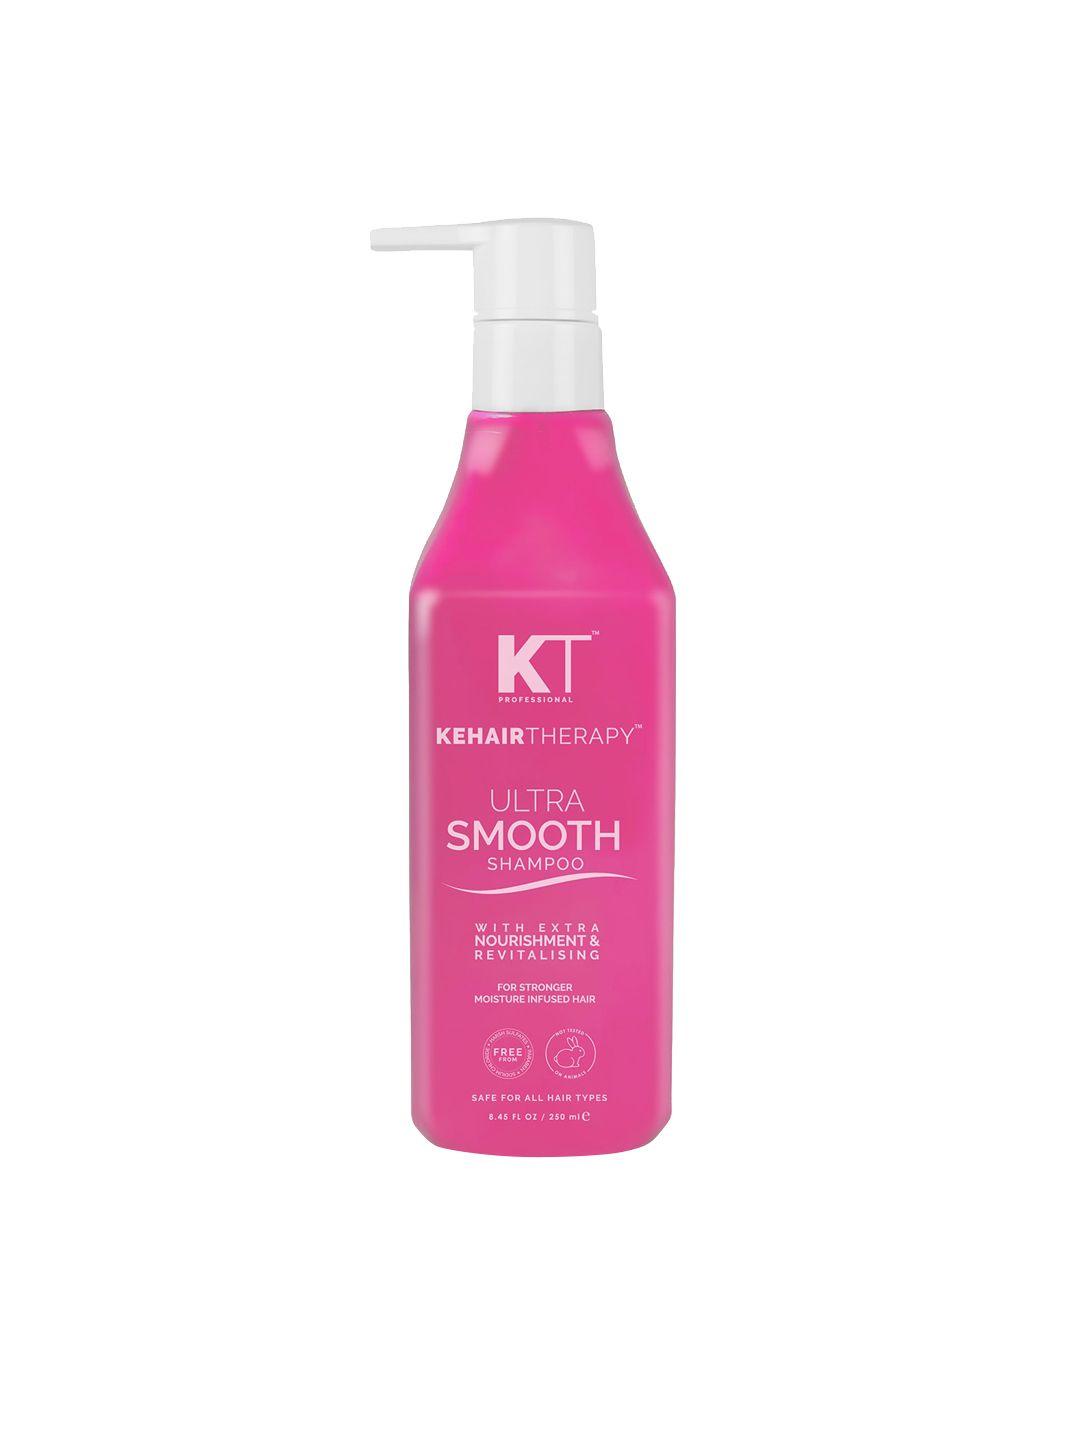 kehairtherapy unisex professional kehairtherapy sulfate free ultra smooth shampoo 250 ml